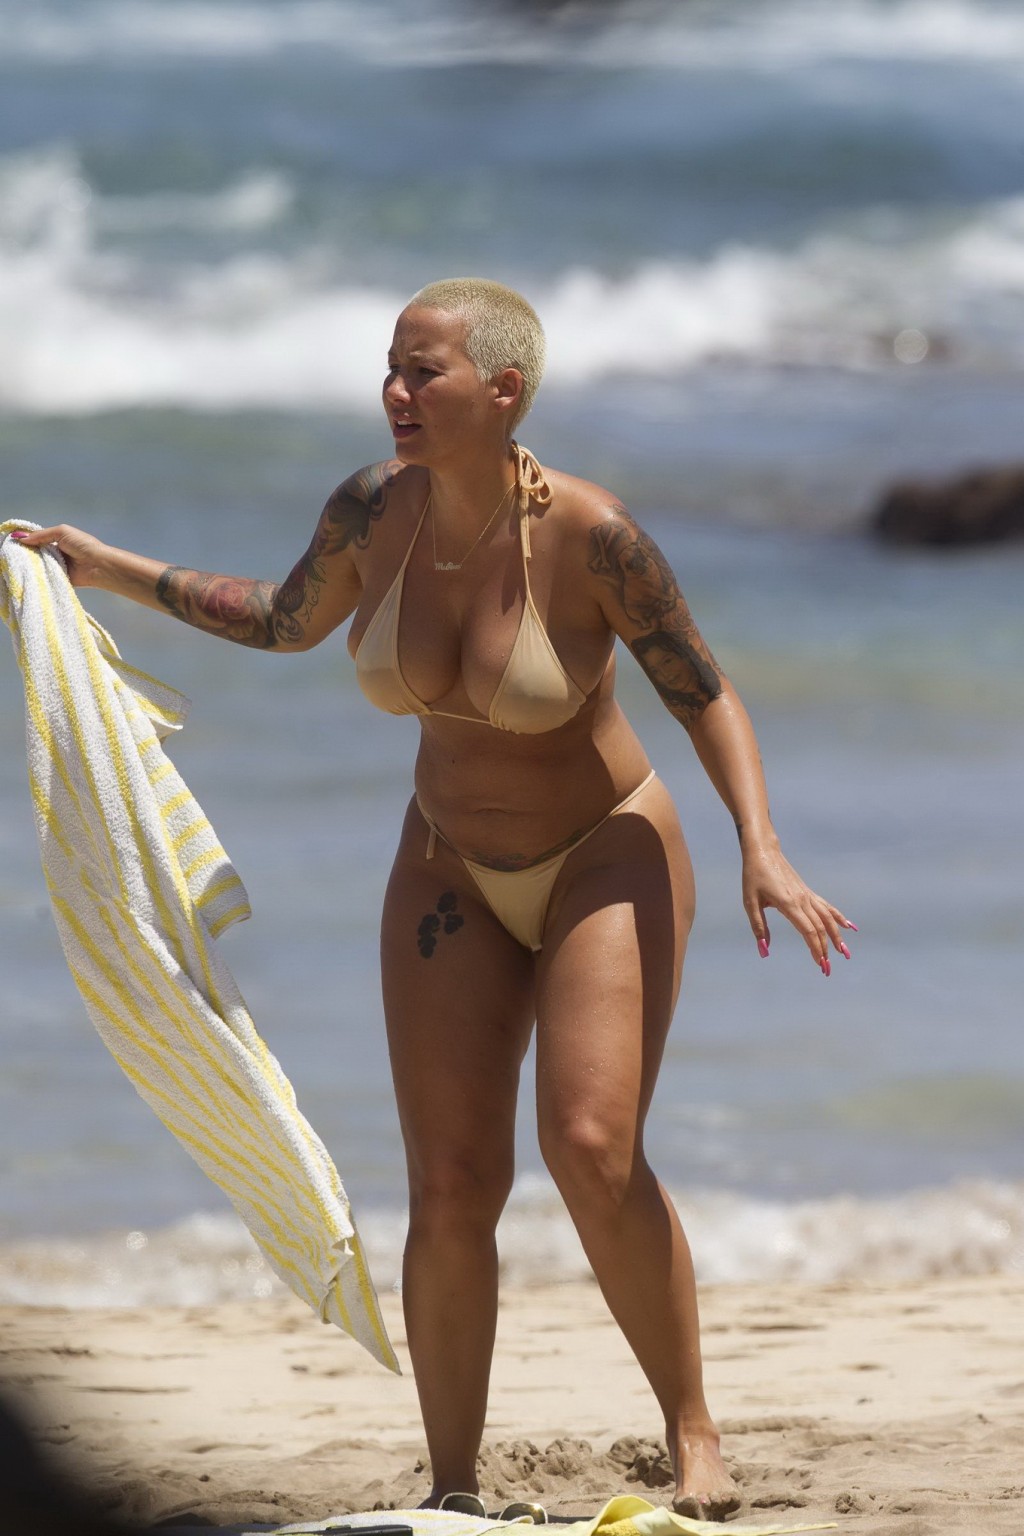 Amber Rose caught topless while sunbathing her huge assets at the beach in Maui #75168893